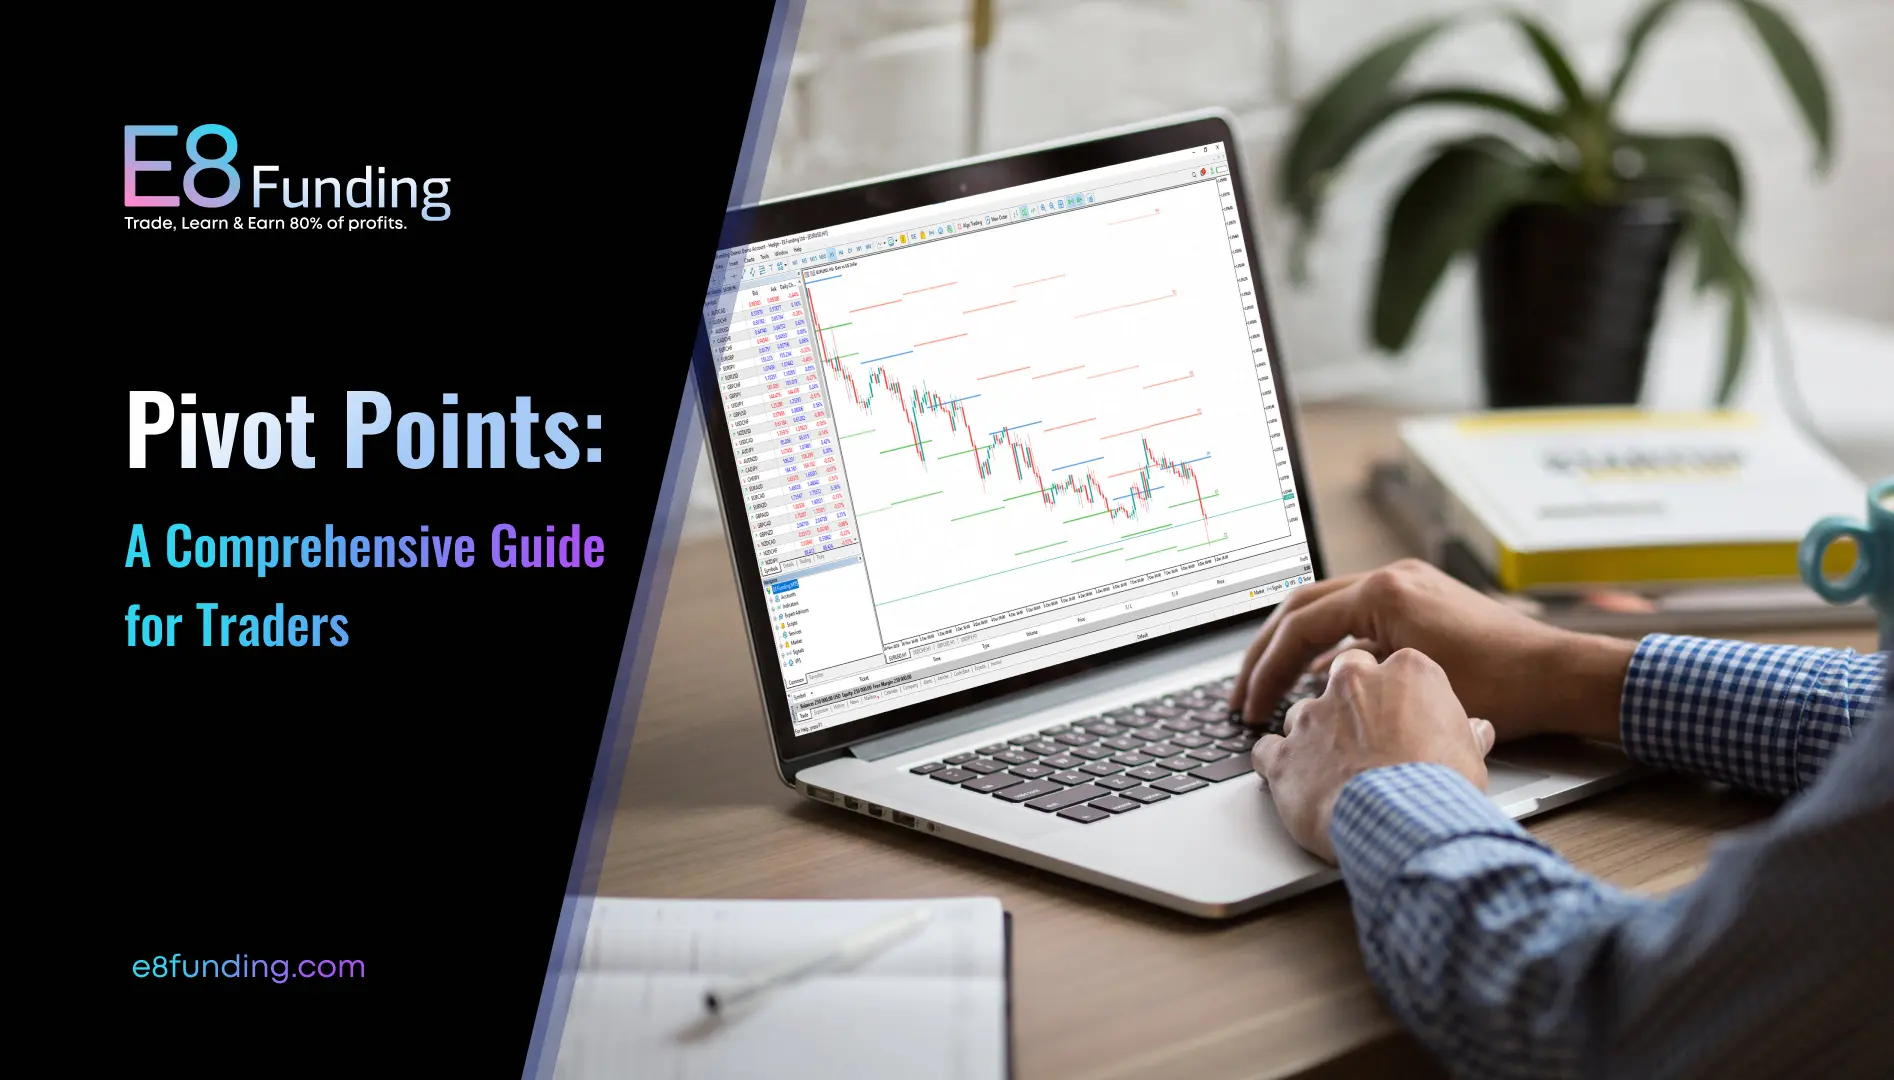 Pivot Points: A Comprehensive Guide for Traders